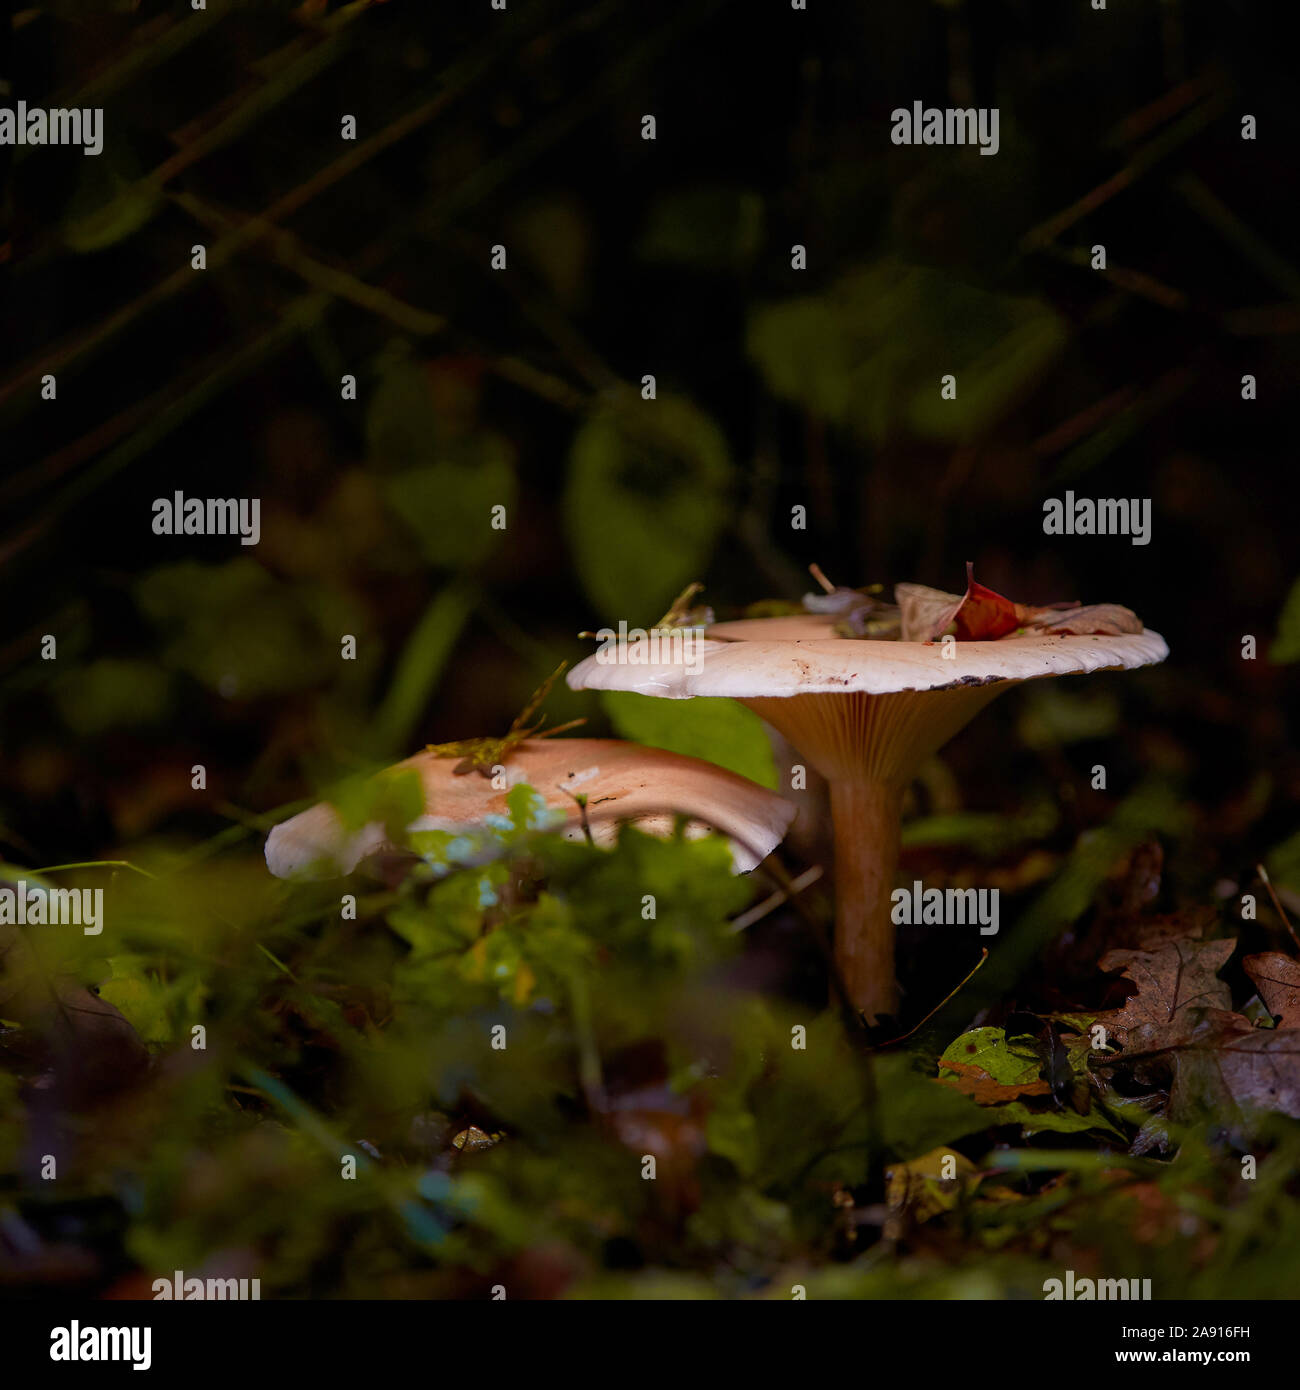 Fungi Mushrooms on a forest florr with shallow depth of field Stock Photo